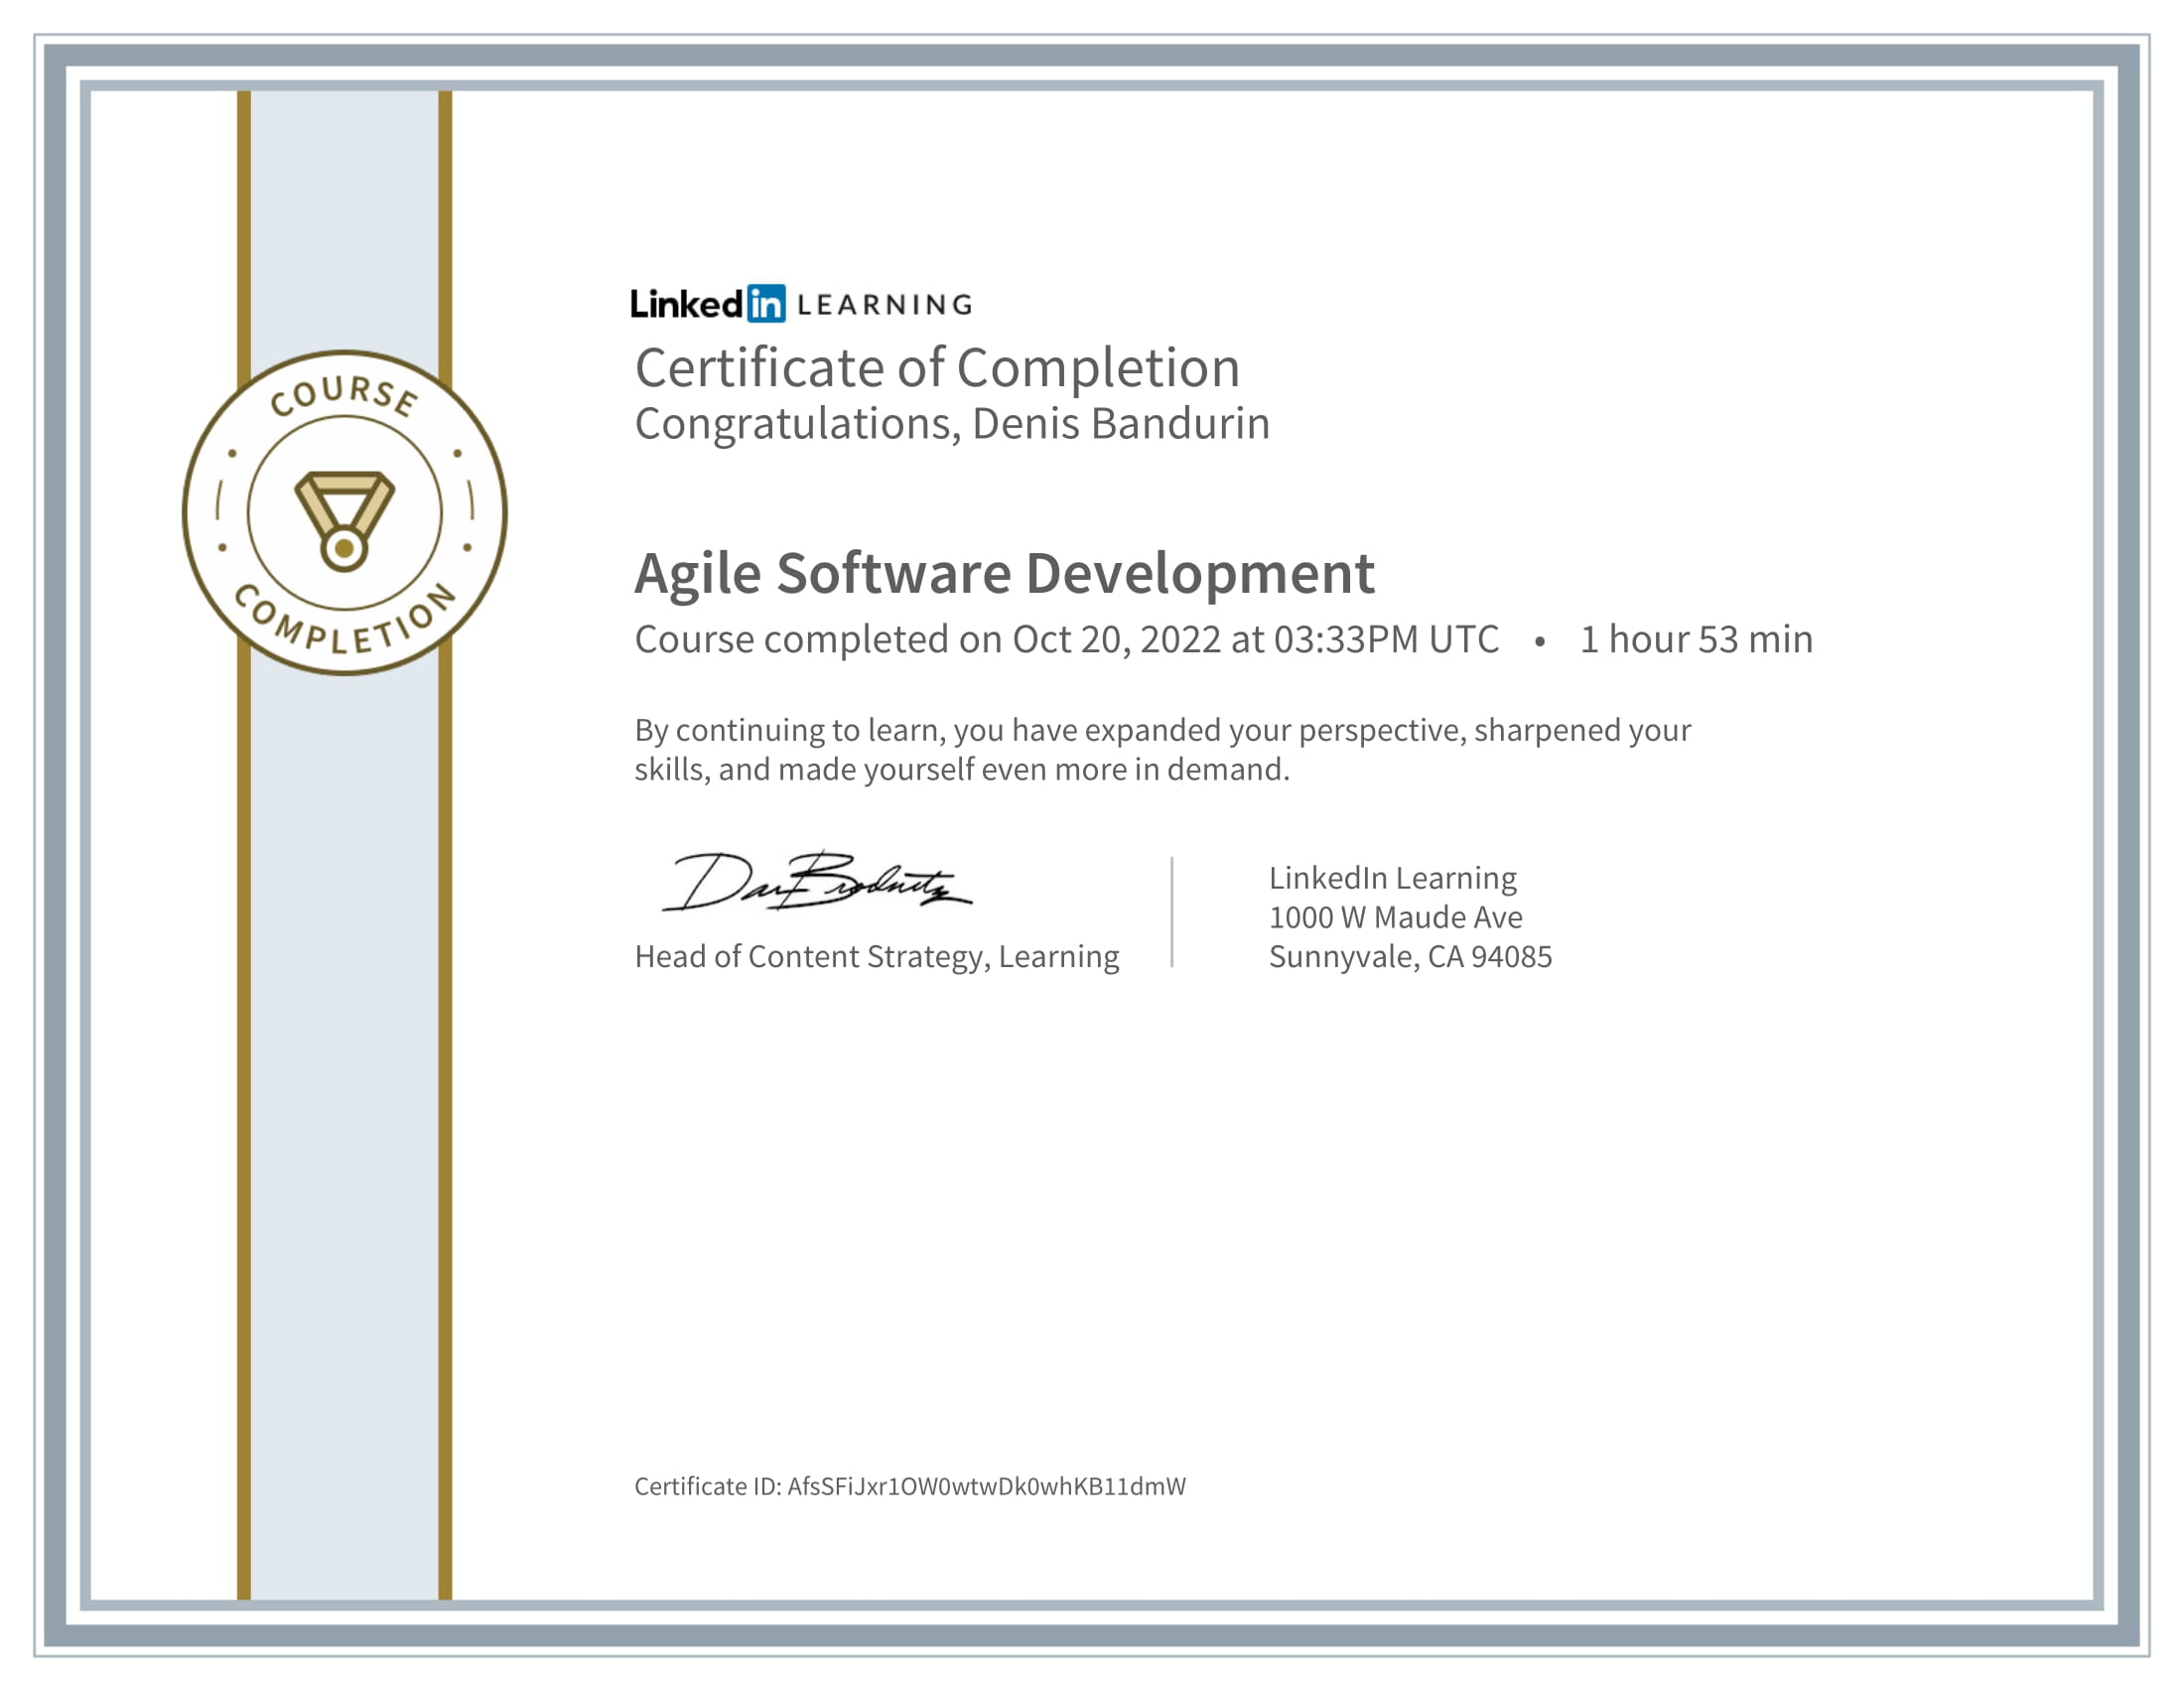 Certificate from Agile software development